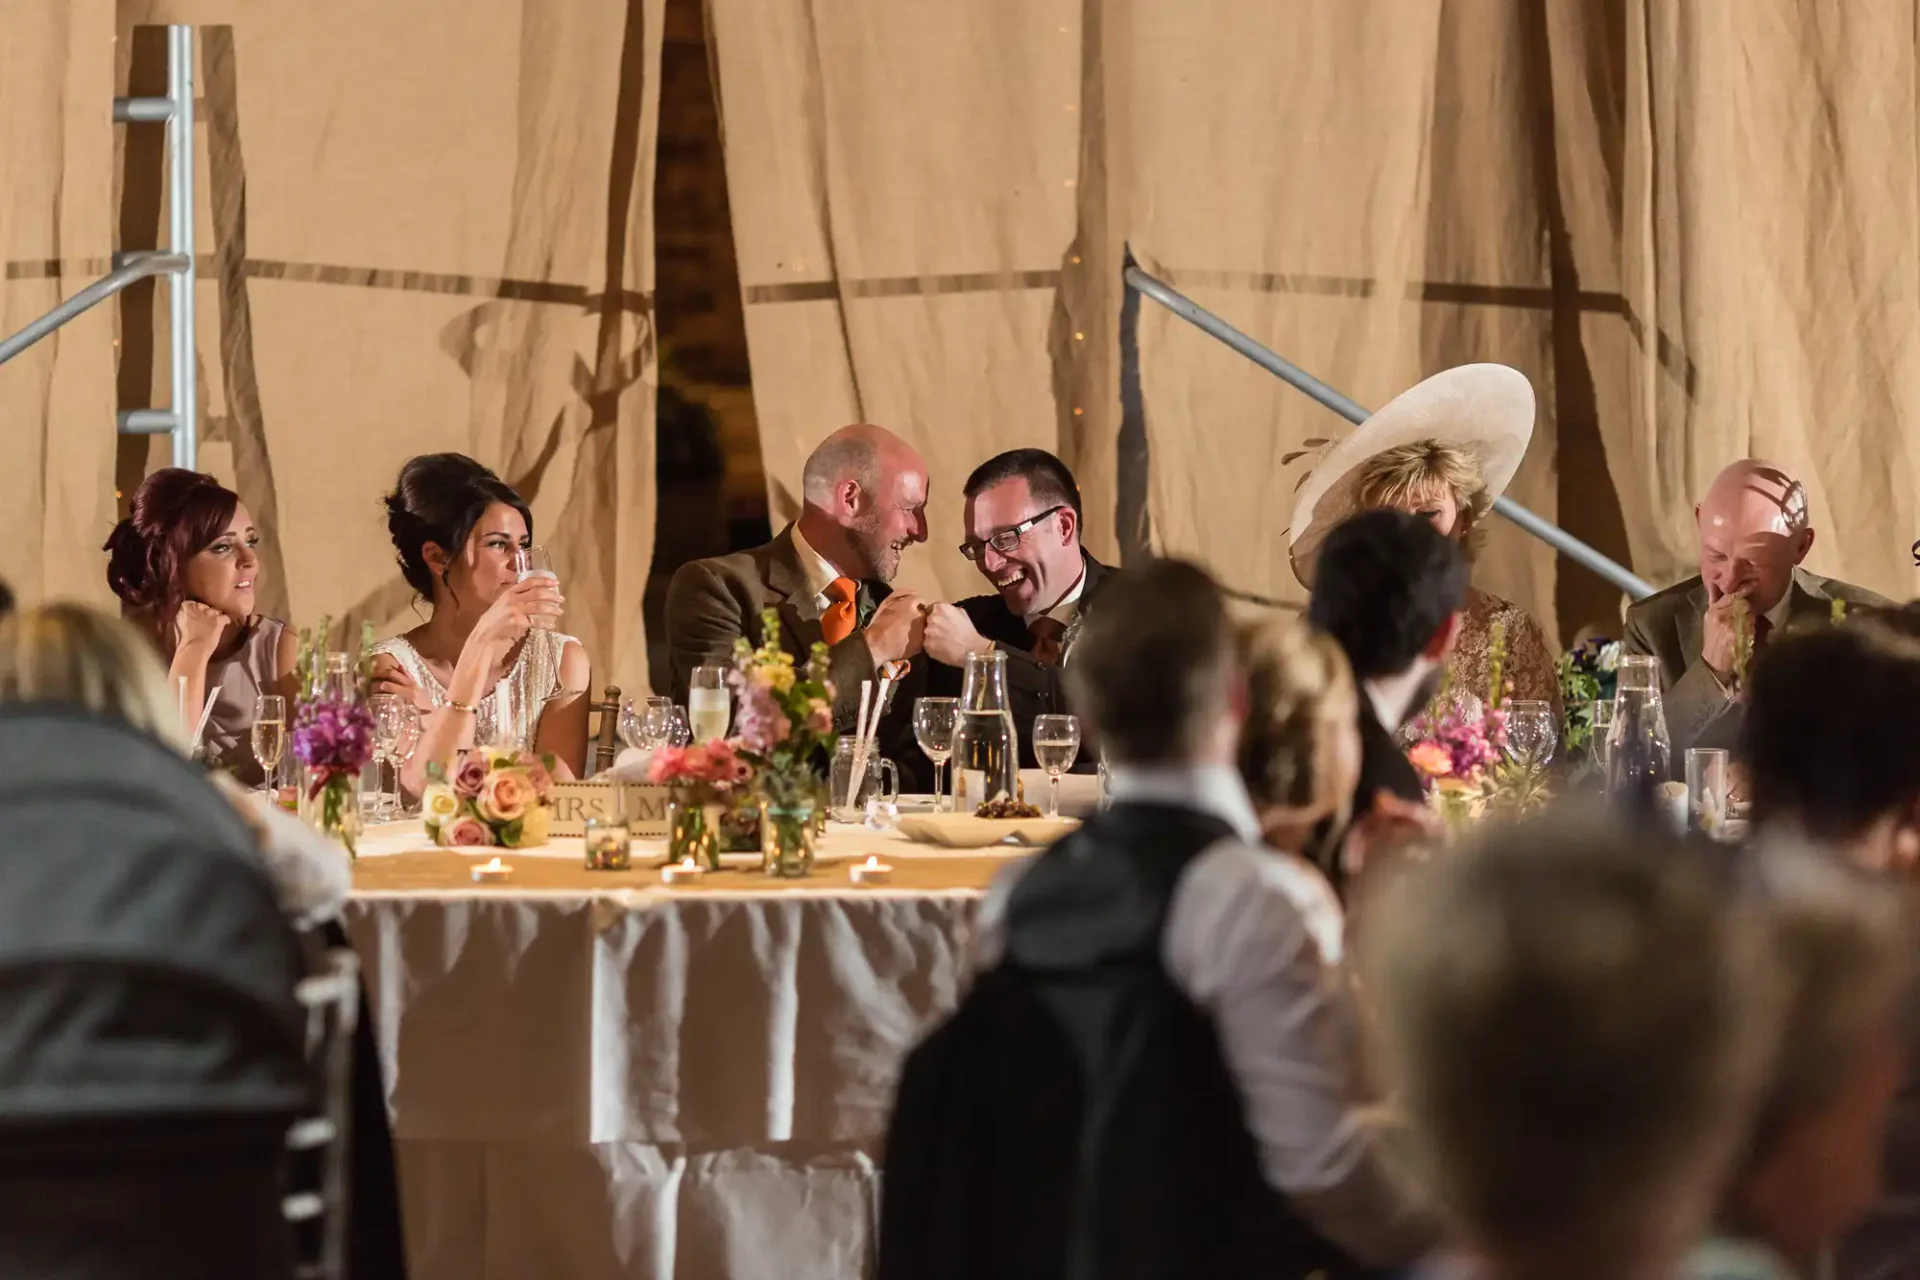 Wedding guests laughing and interacting at a banquet table decorated with flowers inside a tent.